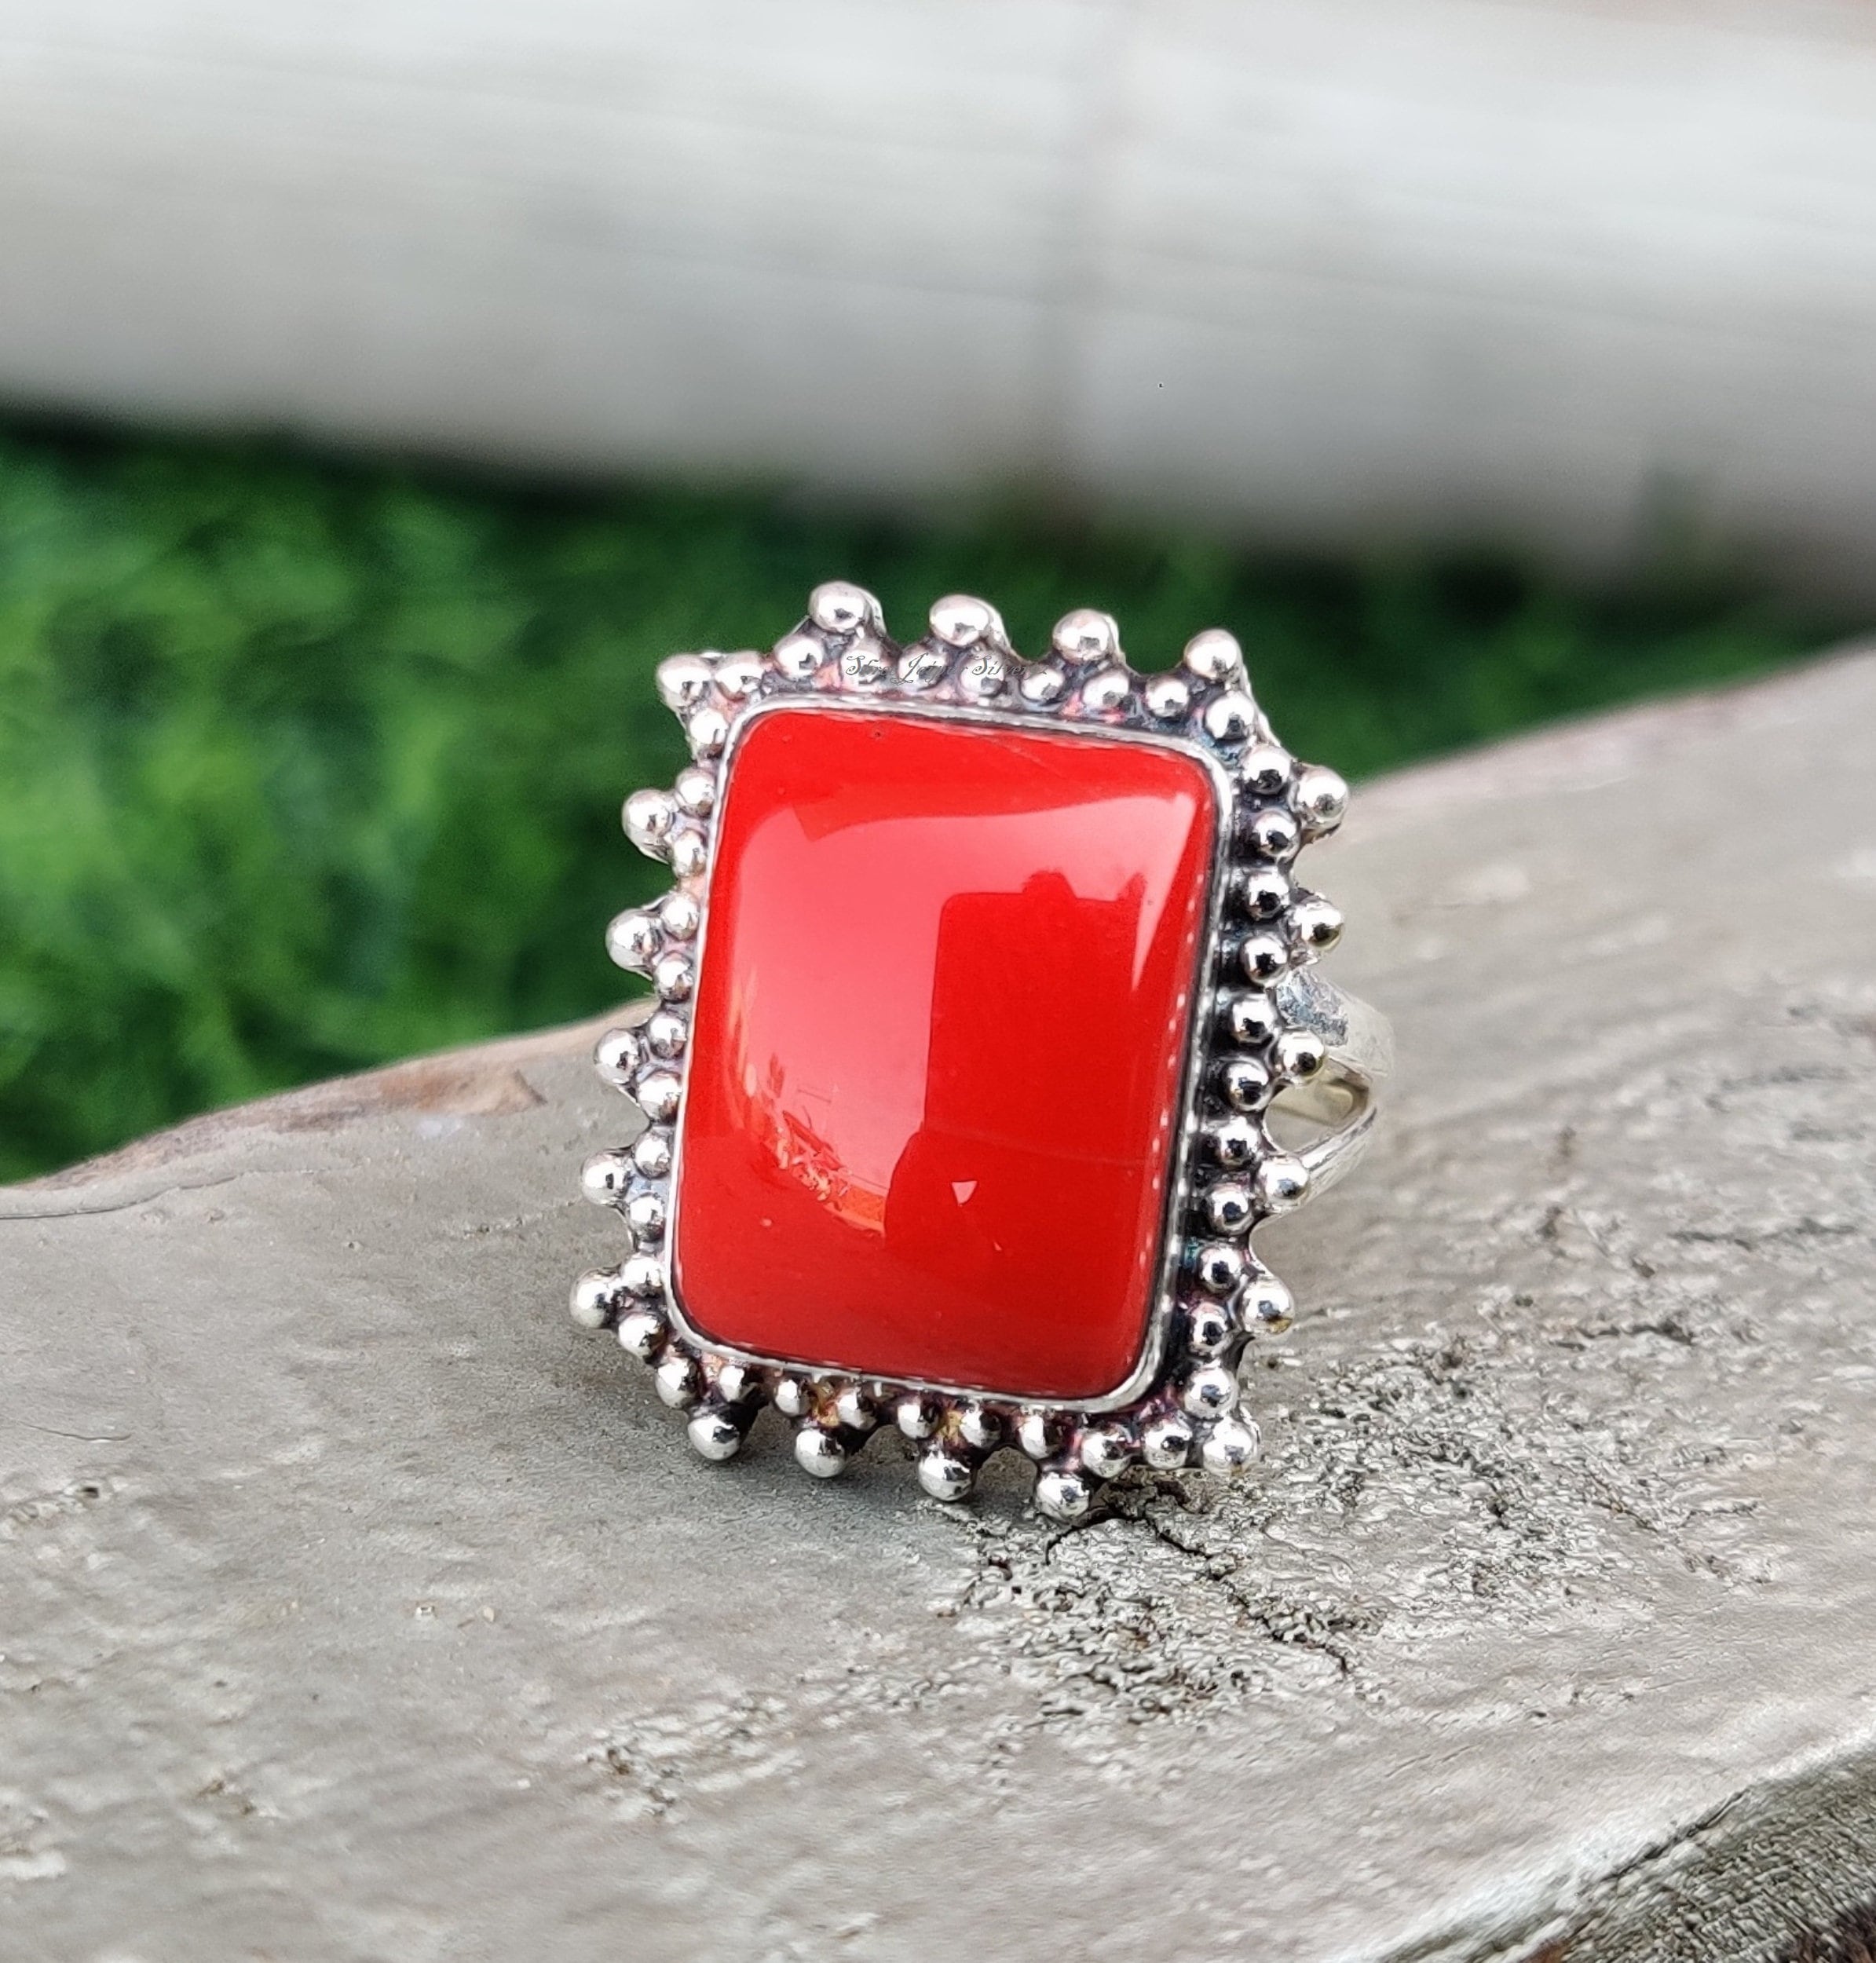 Antique 18K Coral & Seed Pearl Ring – The Koven Court